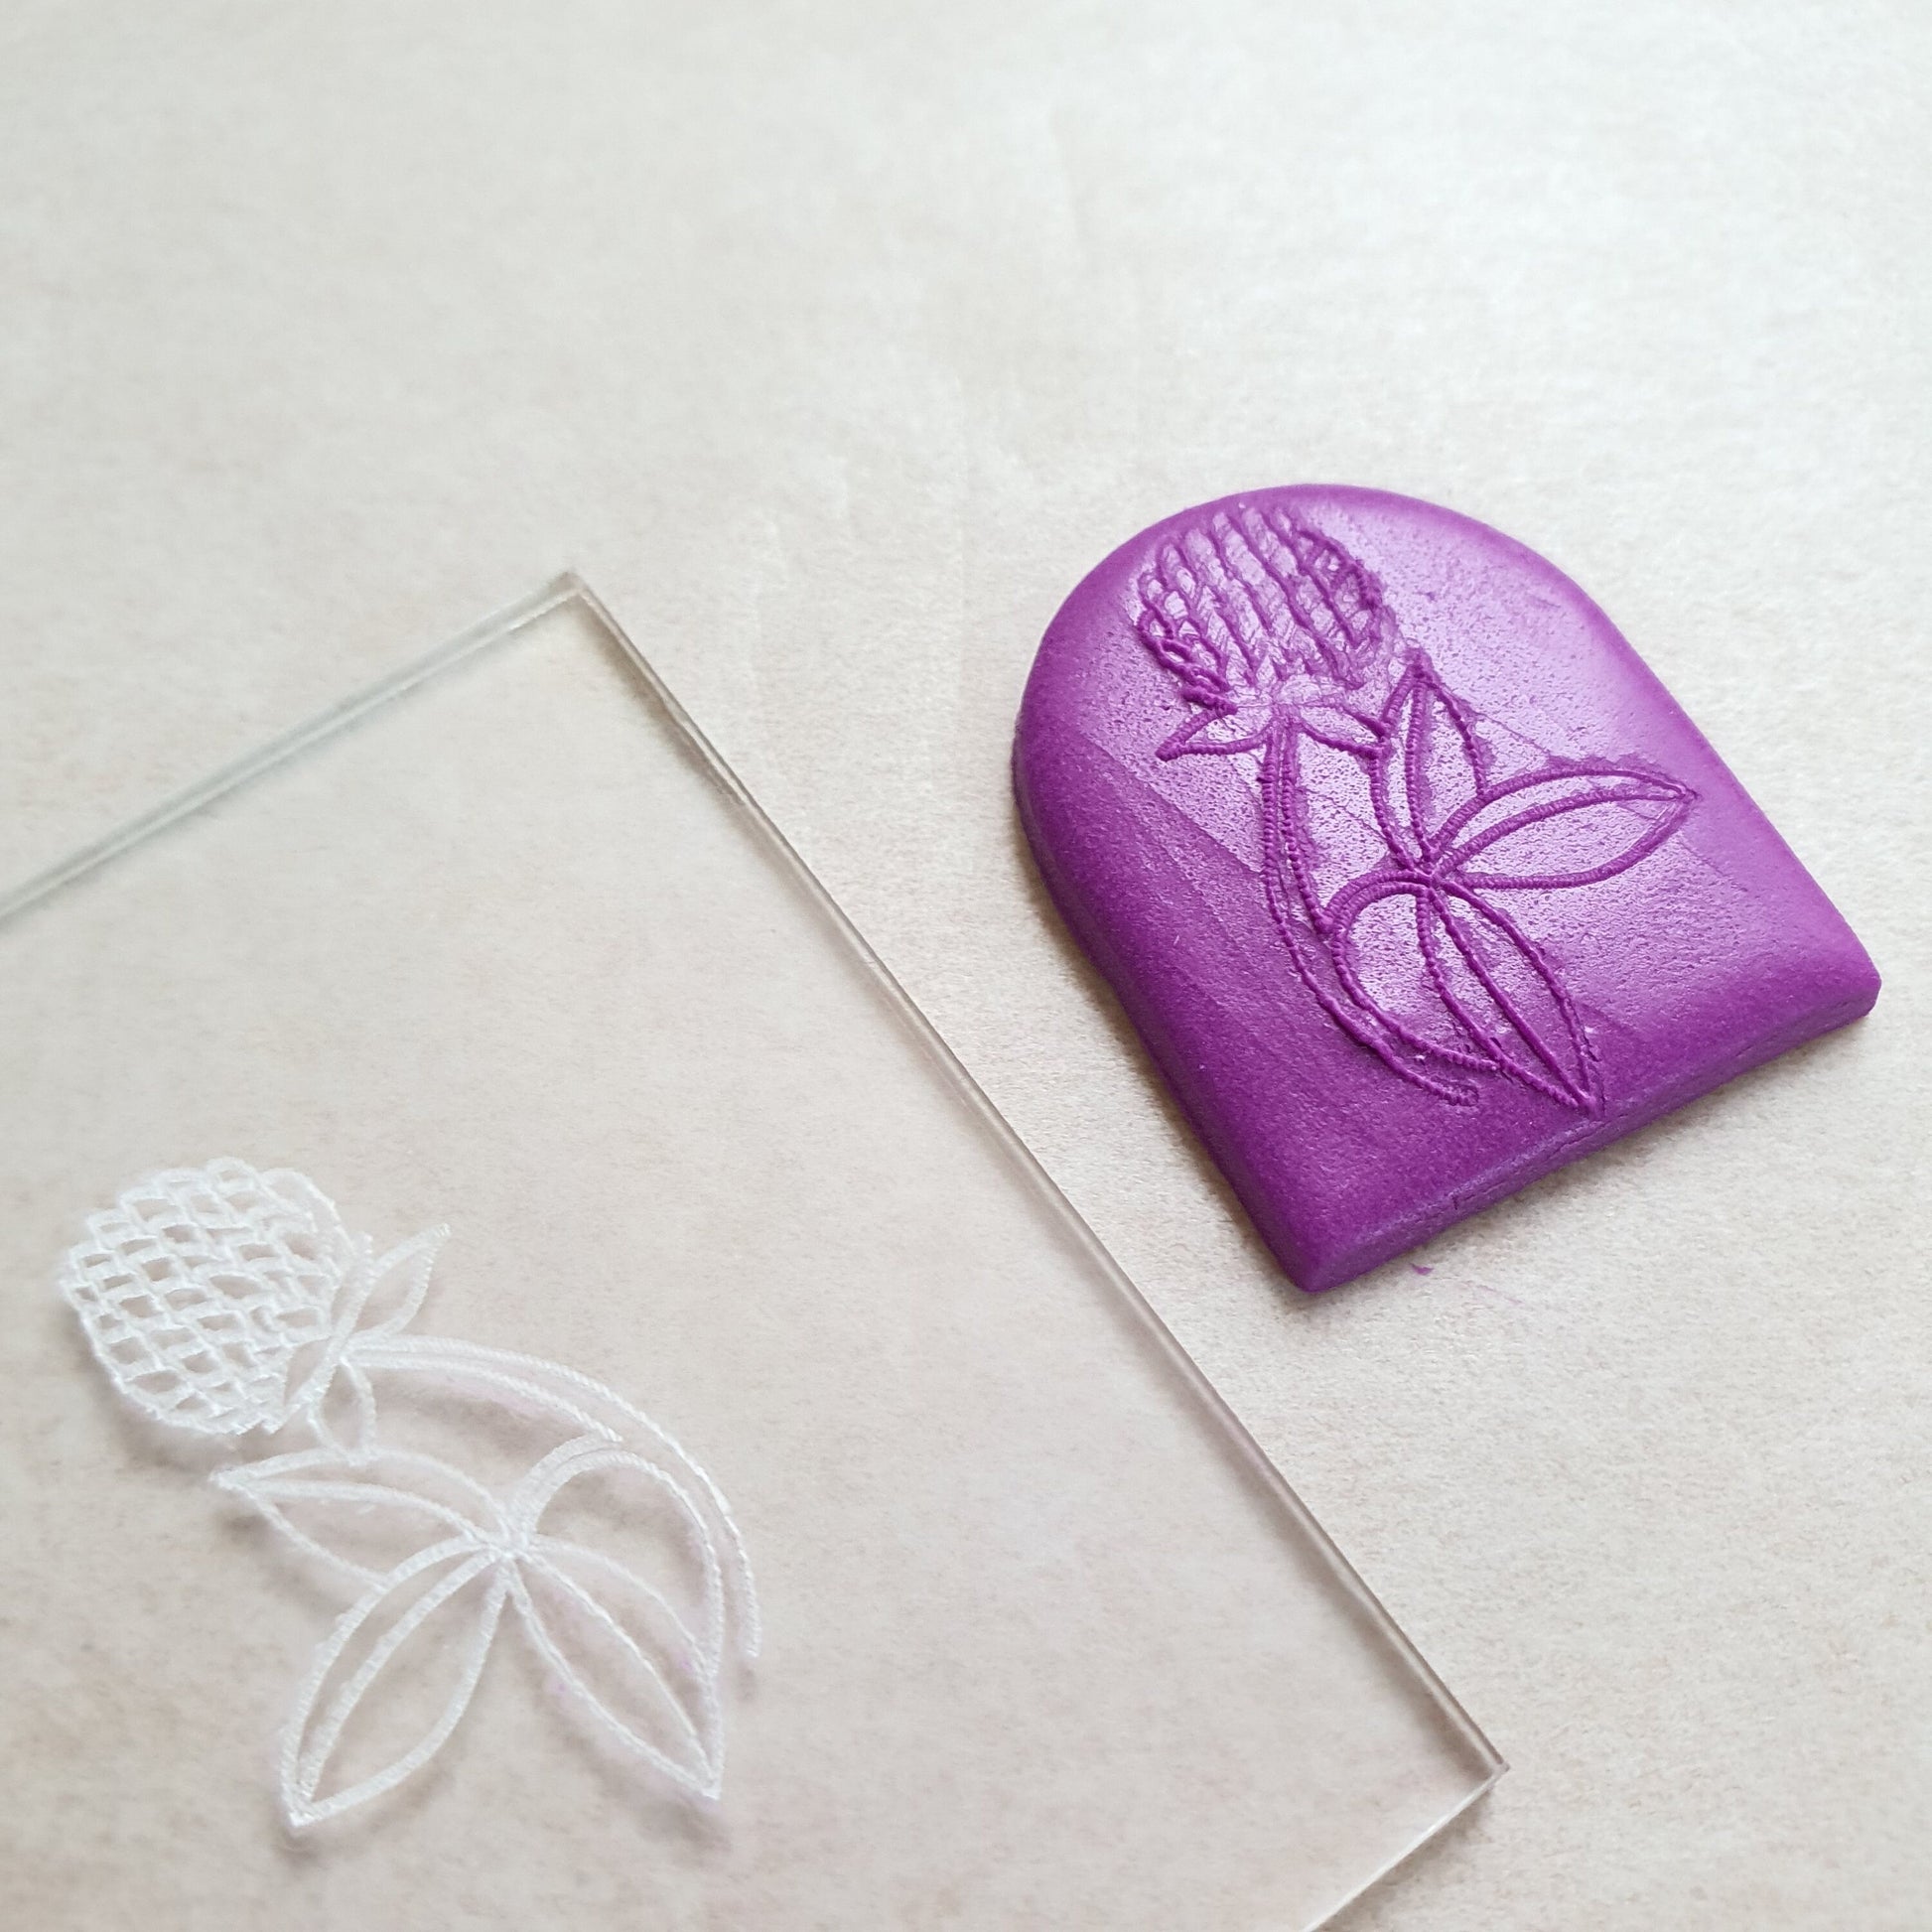 Embossing stamp for polymer clay "Clover" Floral texture plate Flower debossing stamp Acrylic stamps - Luxy Kraft